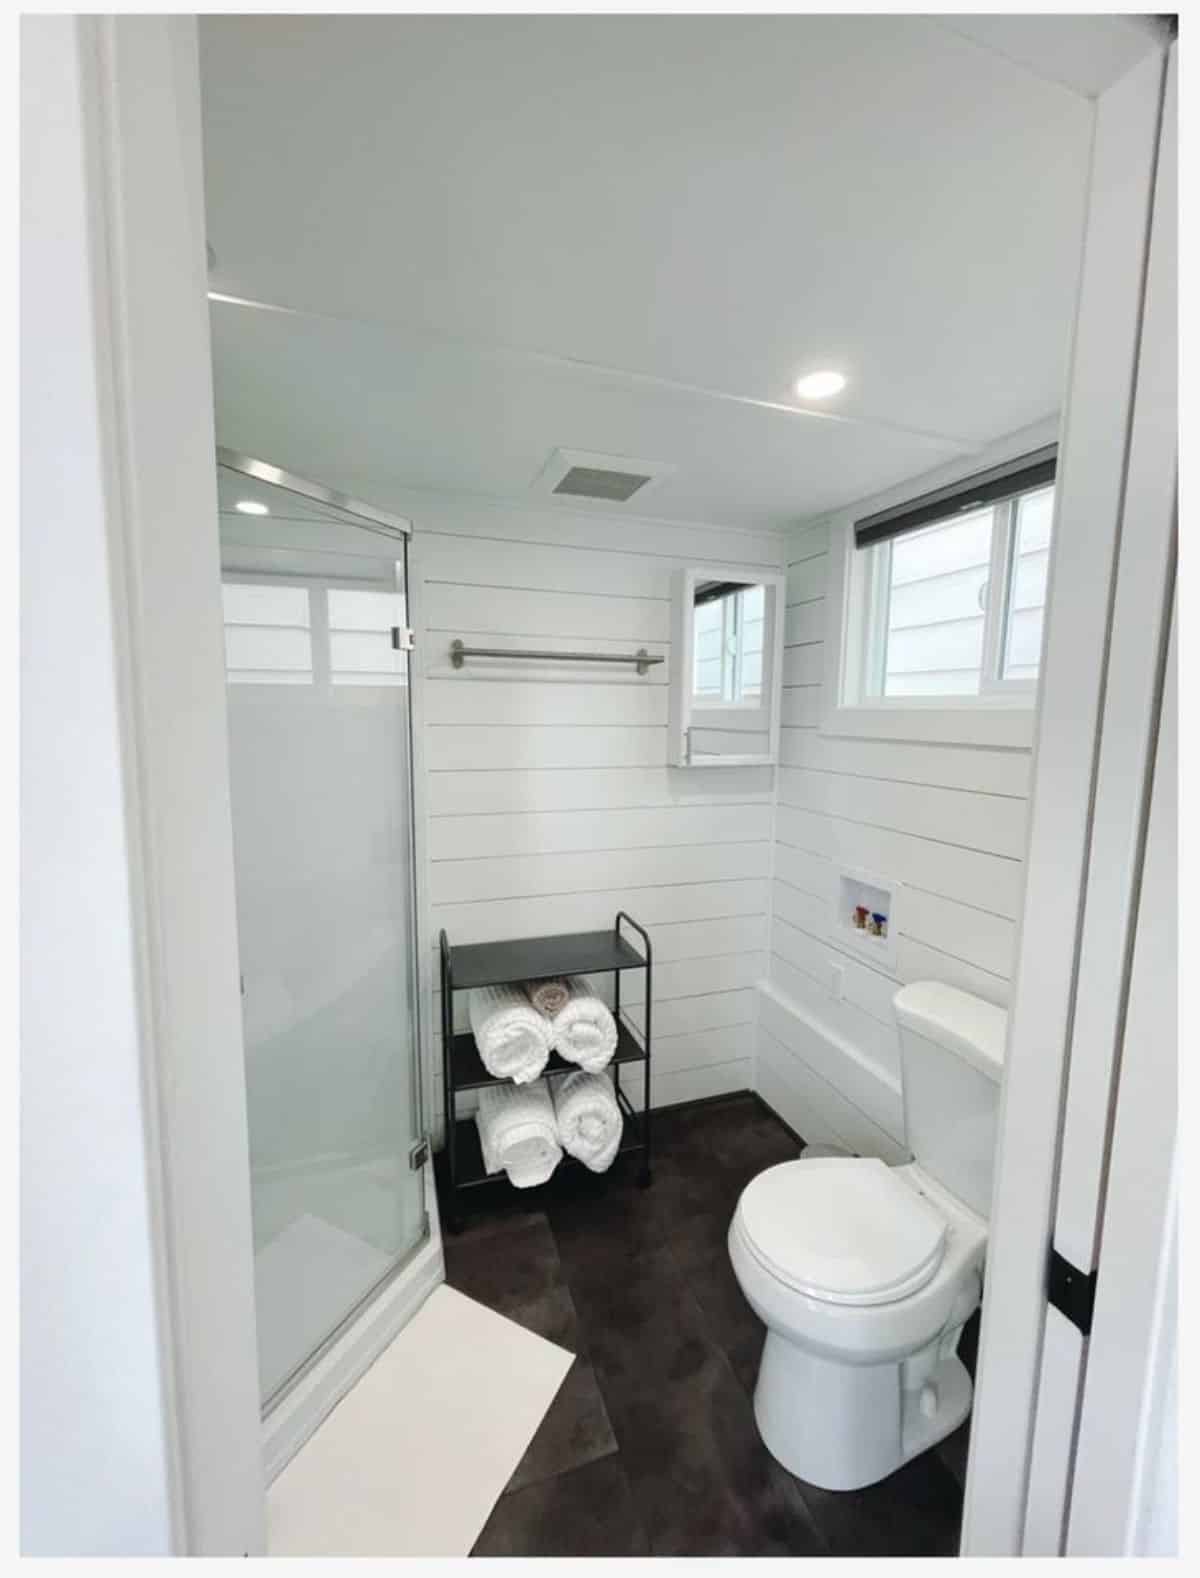 Standard toilet and Rack for towels and other toiletries in bathroom of Tiny Home with Financing